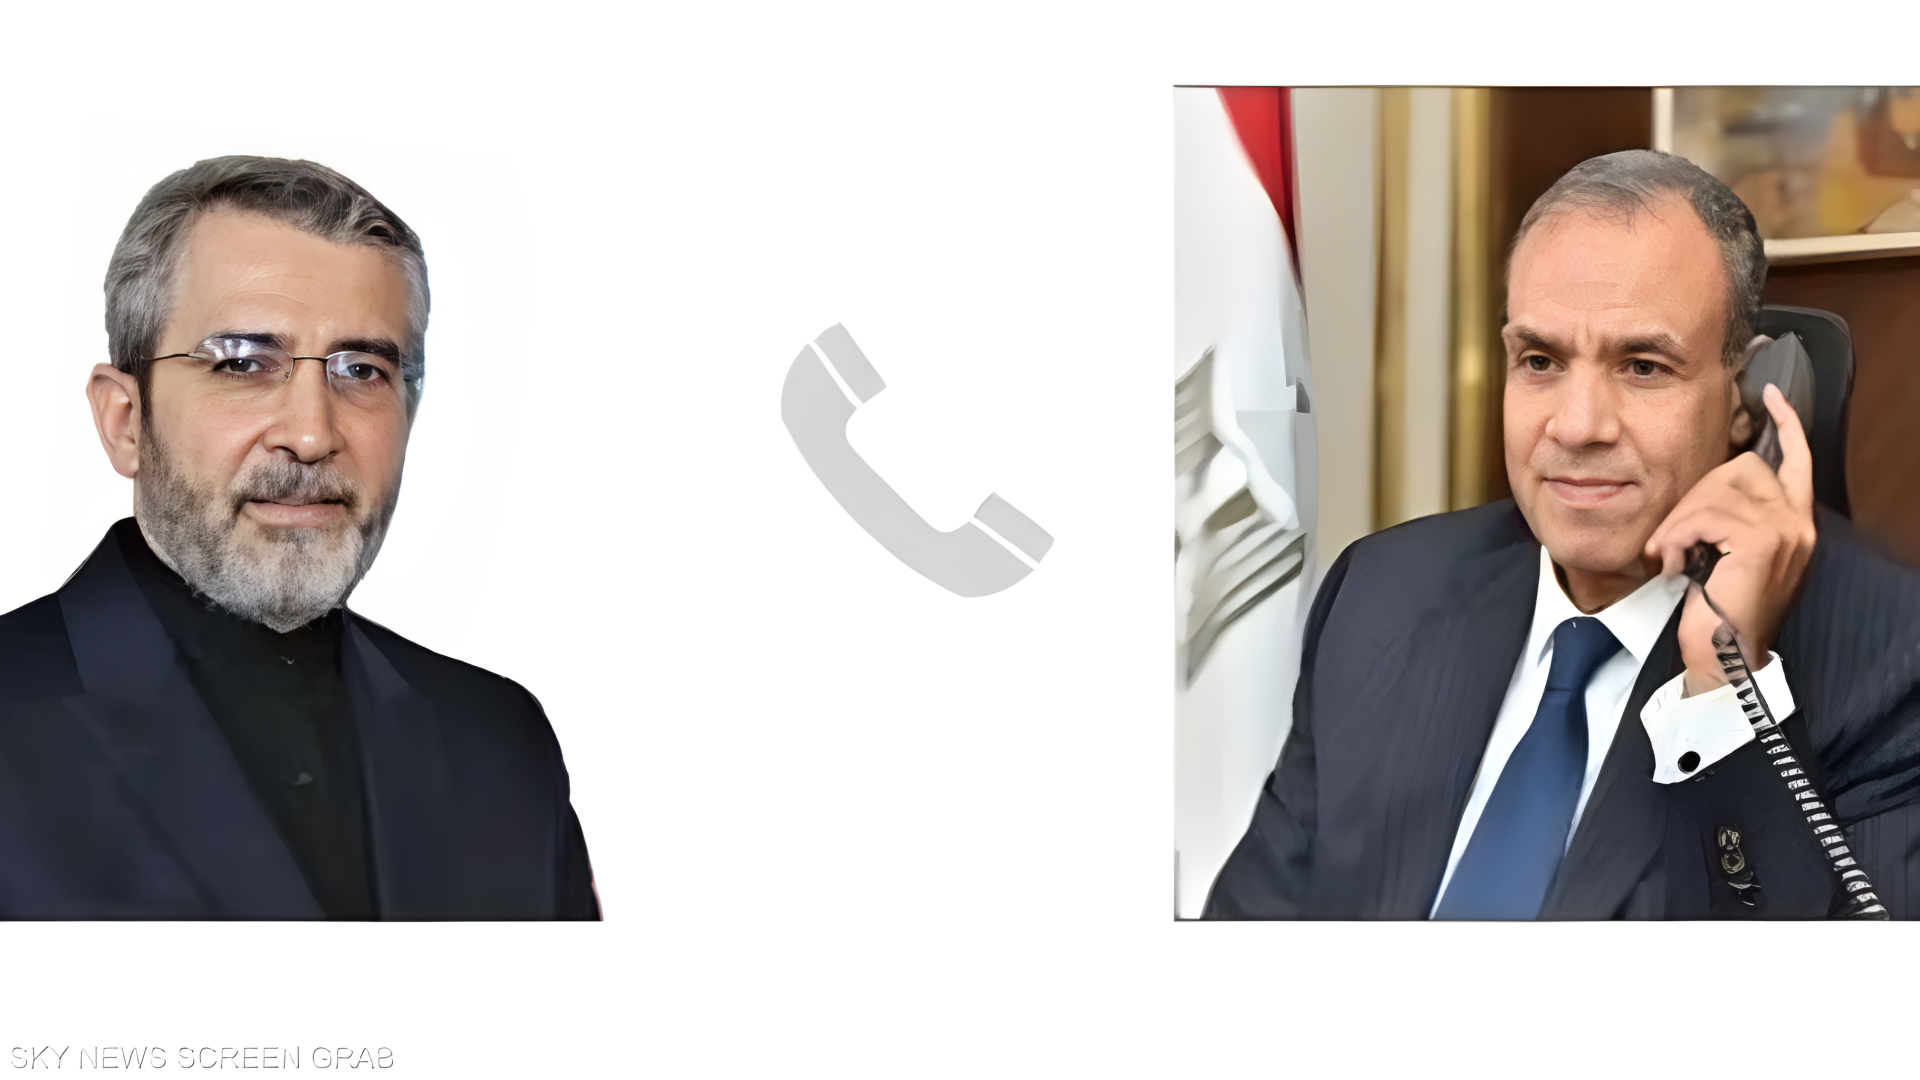 Egyptian Foreign Minister calls for calm in regional tensions during call with Iranian counterpart